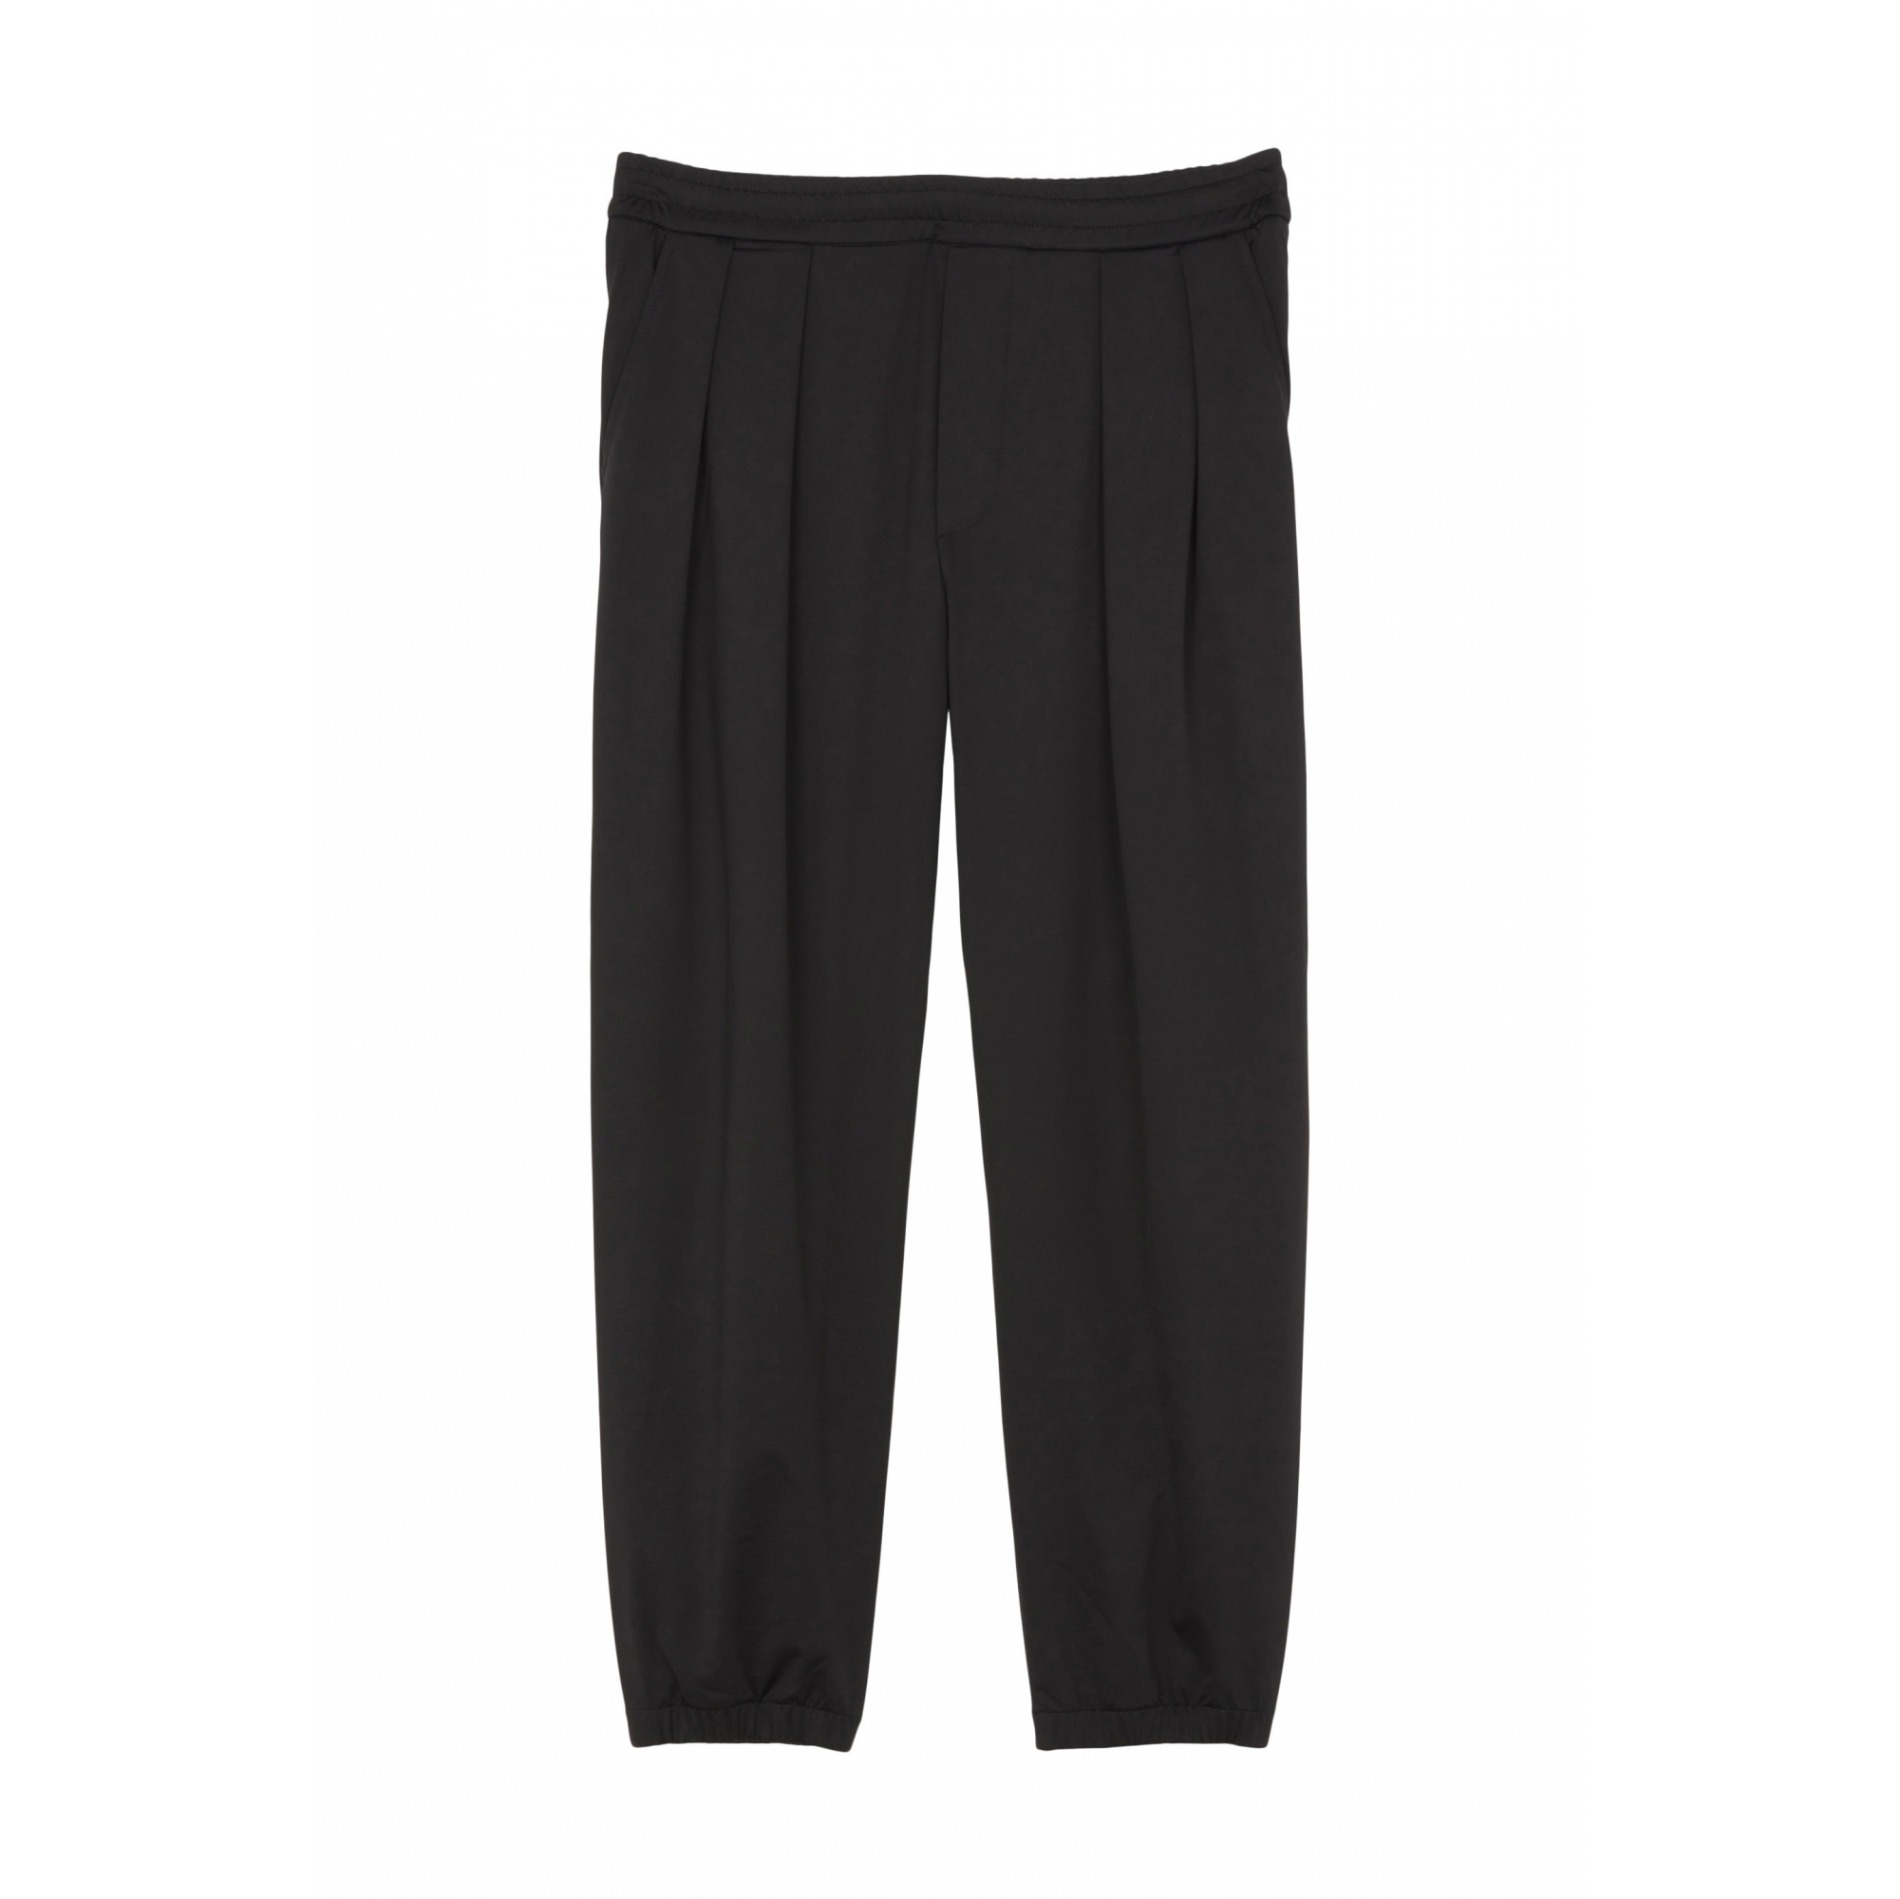 AW22 4SDESIGNS INVERTED PLEAT SWEAT PANT BLACK